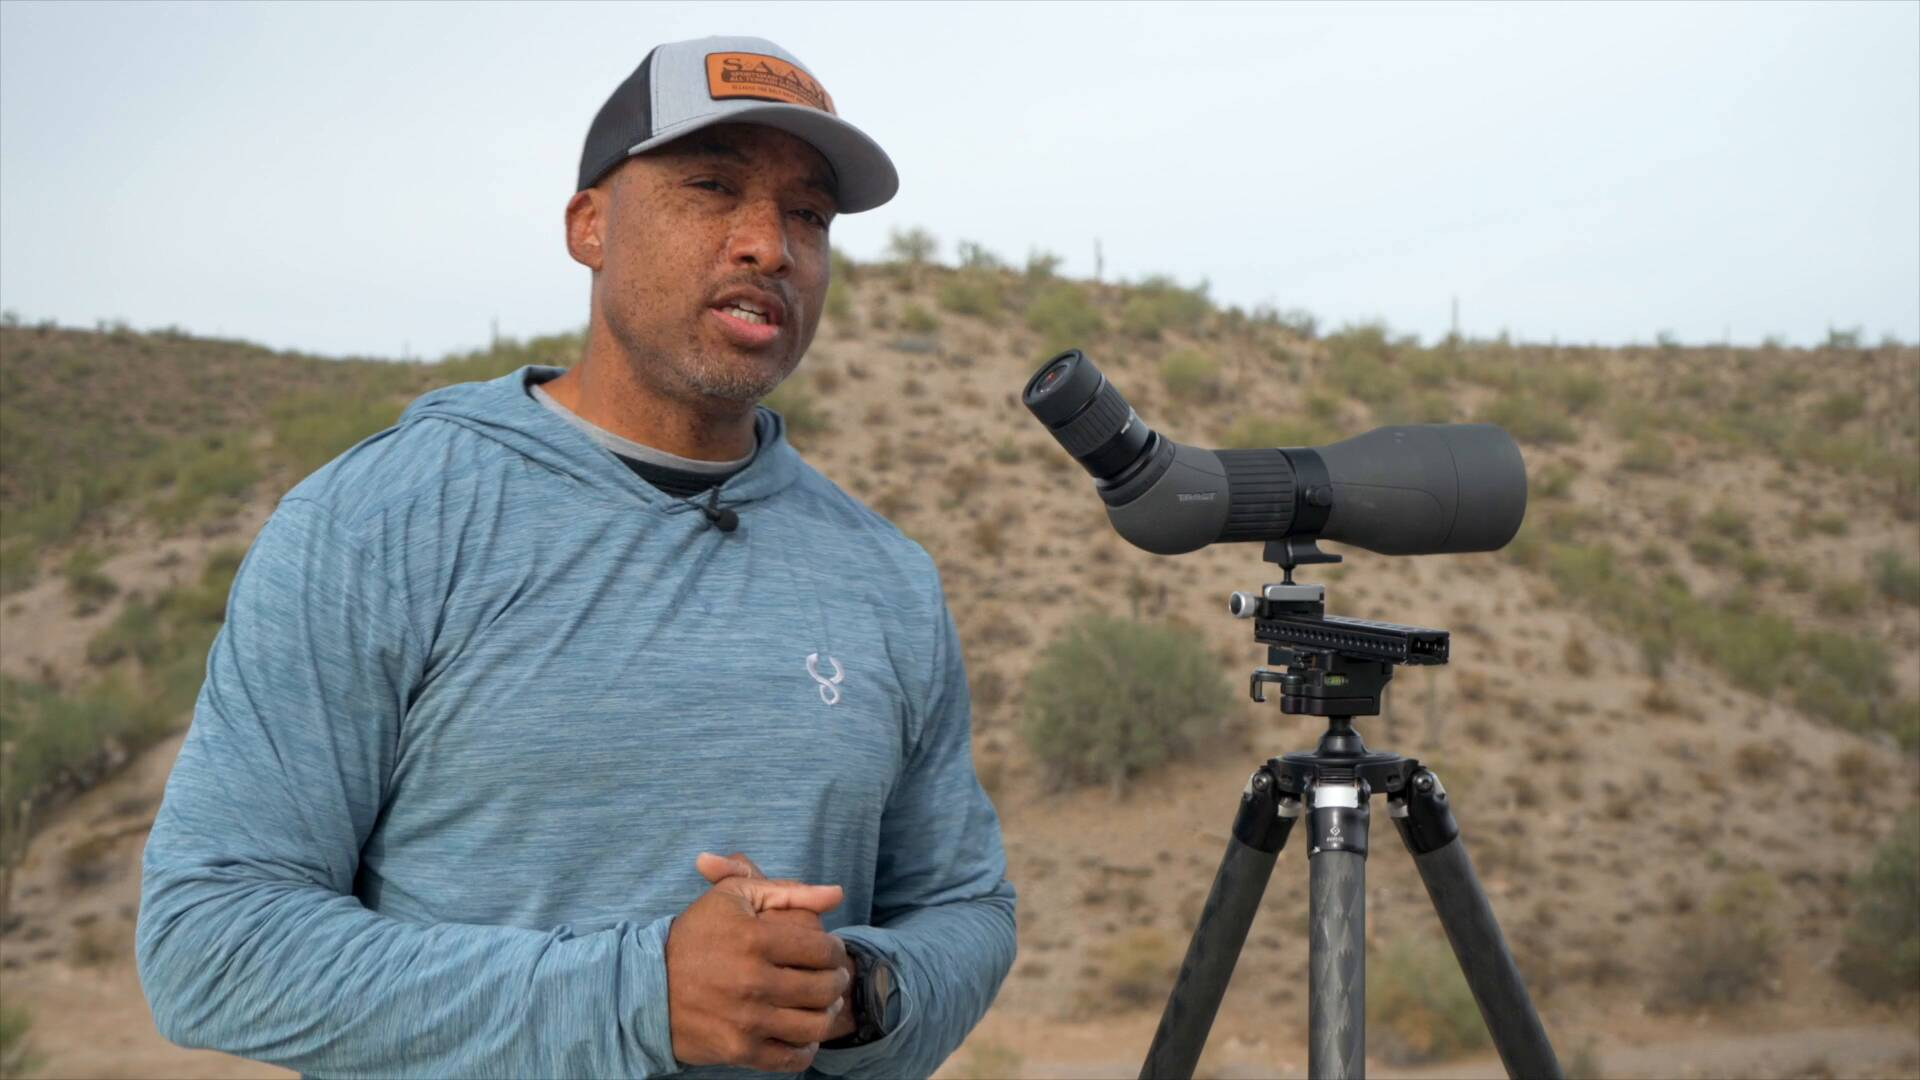 Sean Utley reviews the TORIC 27-55x80 Spotting Scope